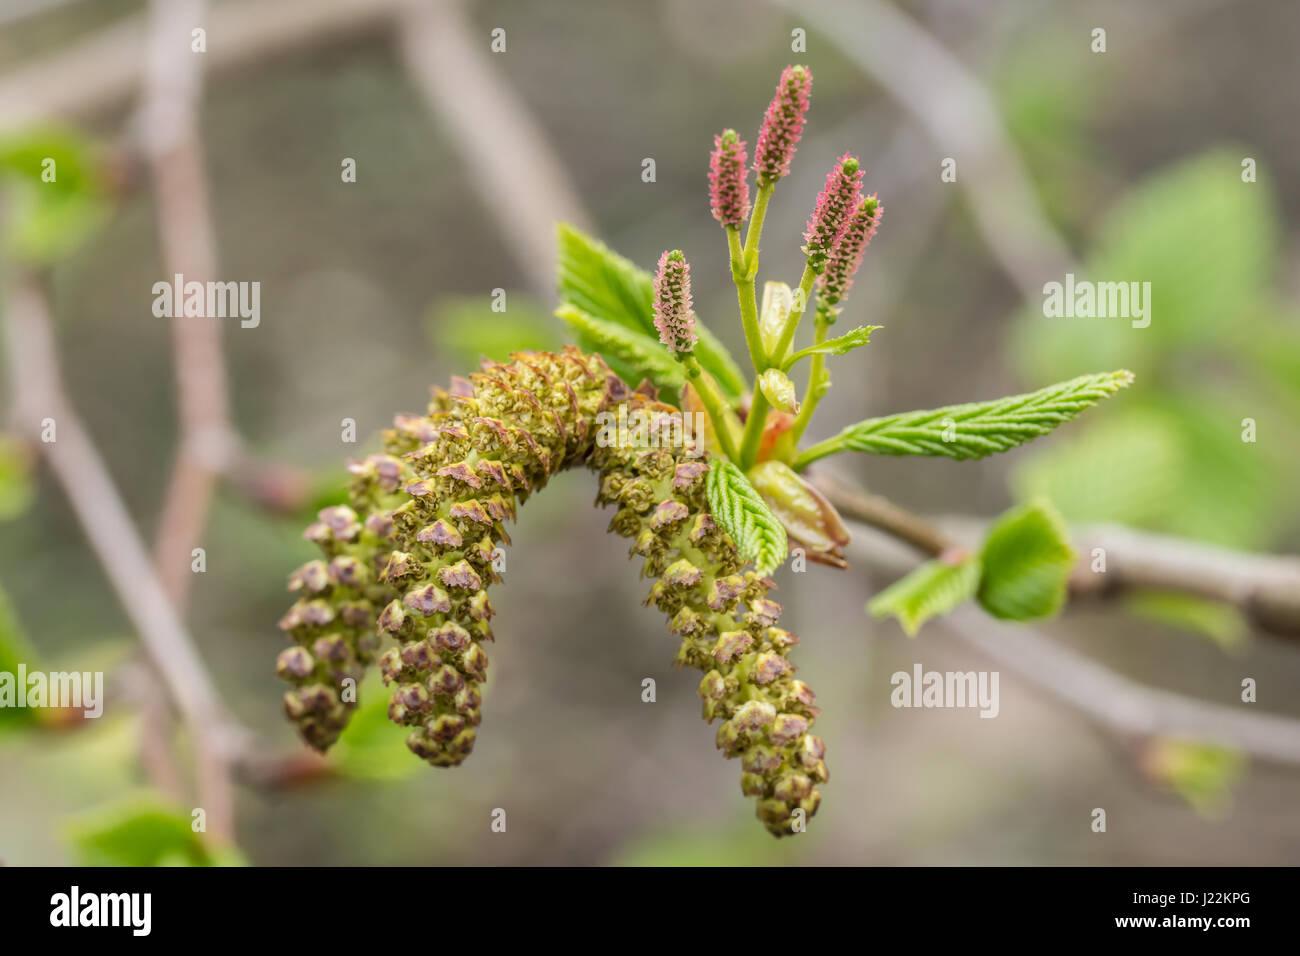 Close up of female and male catkins of the Alnus maximowiczii, an alder tree native to east asia. Stock Photo